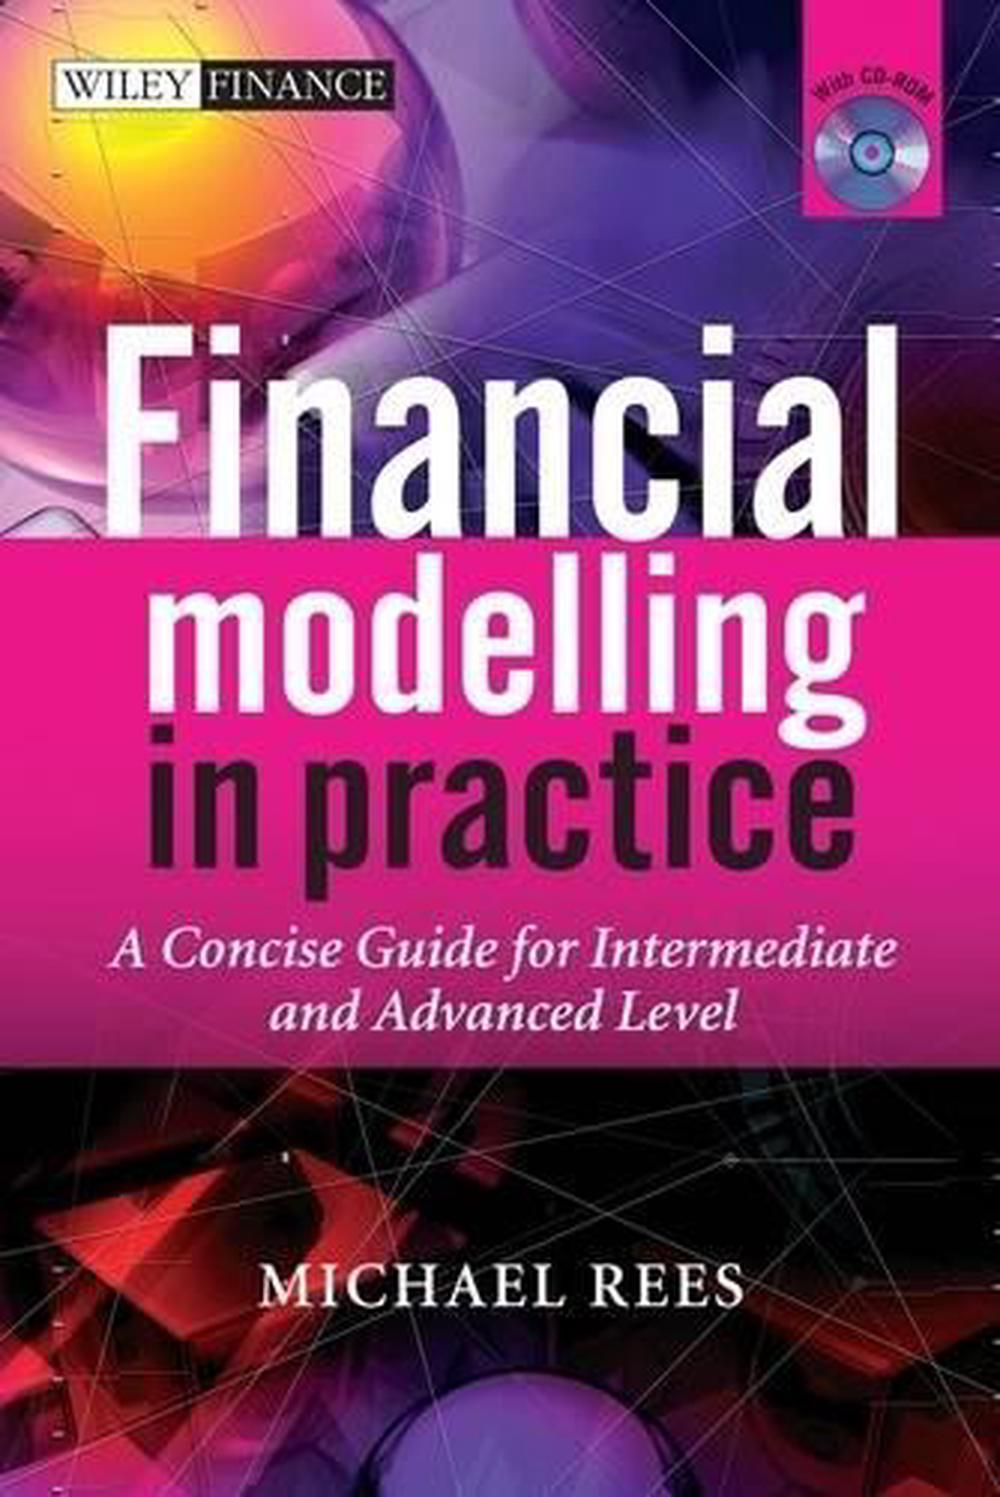 case study on financial modelling